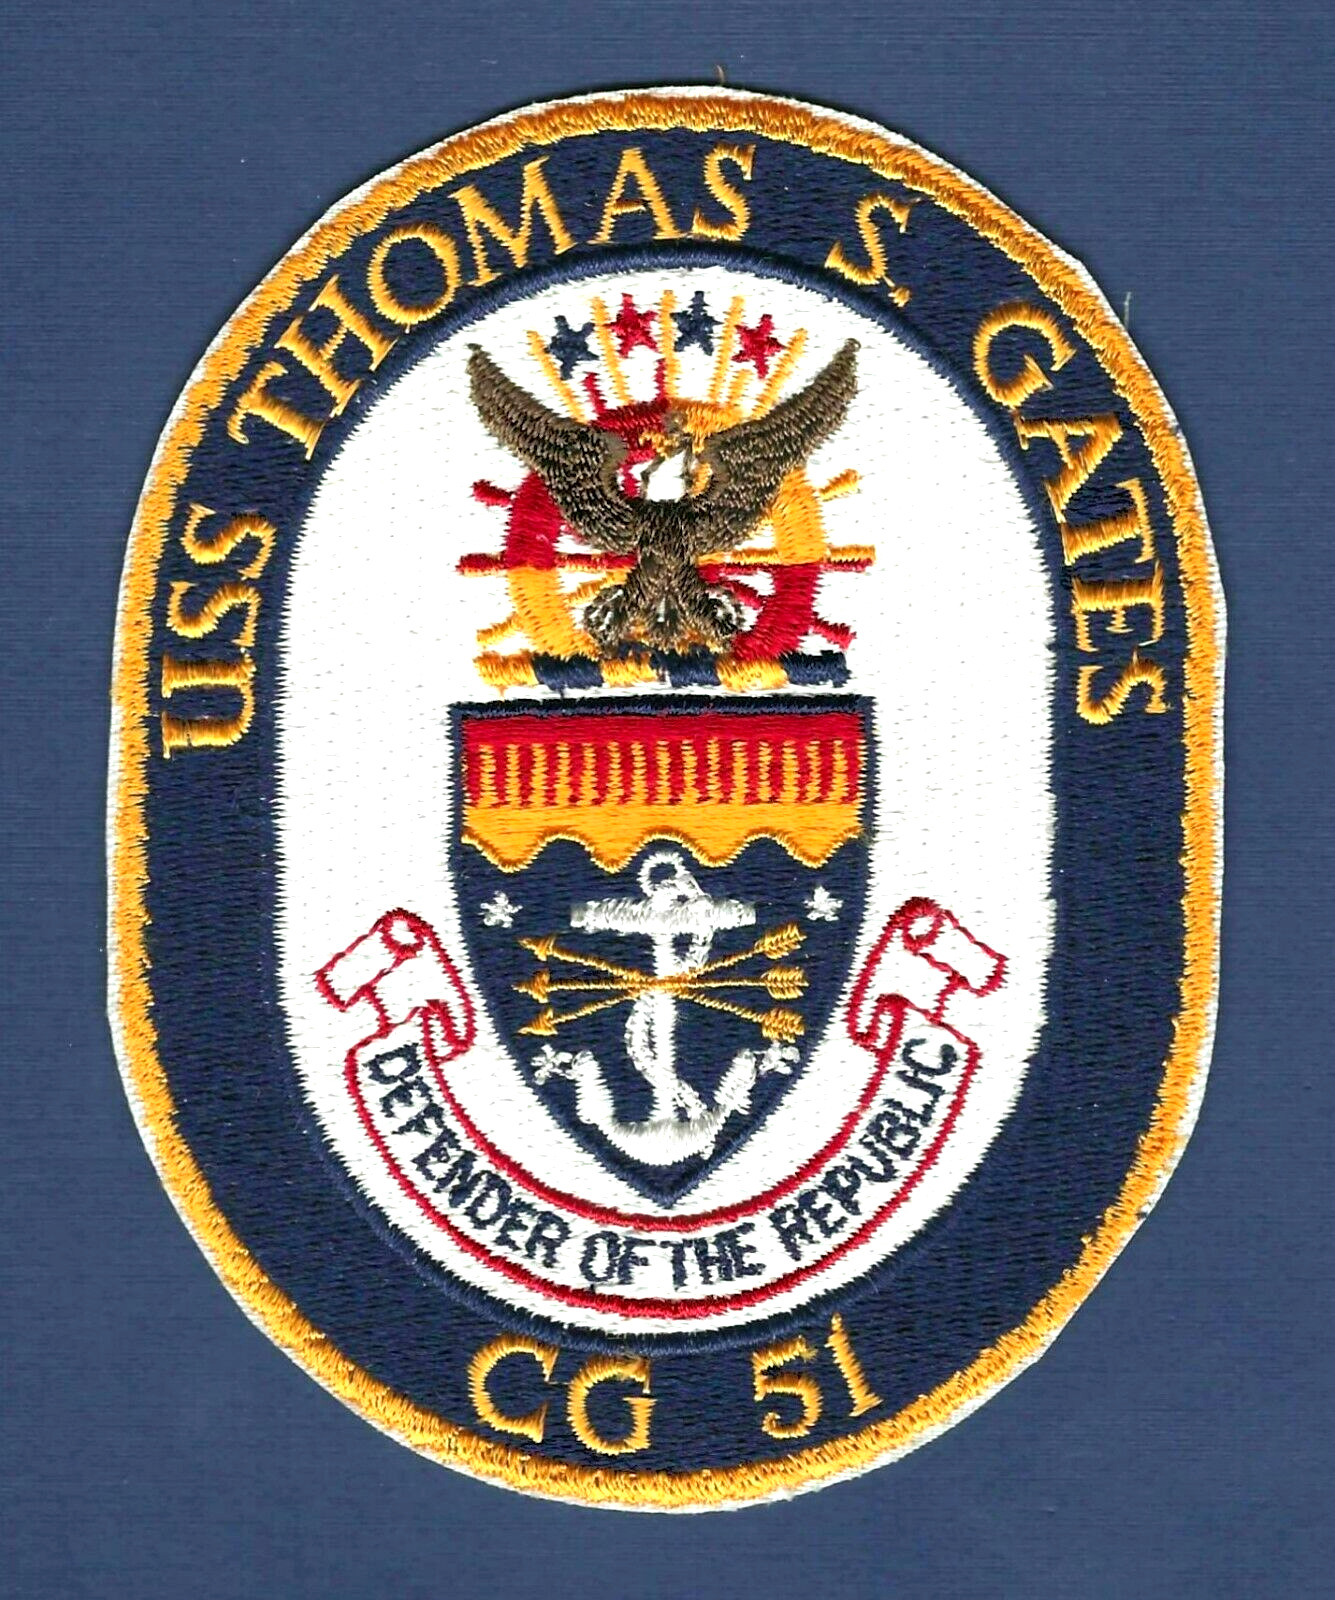 USS THOMAS S. GATES CG-51 Guided Missile Cruiser Ship's Crest Patch